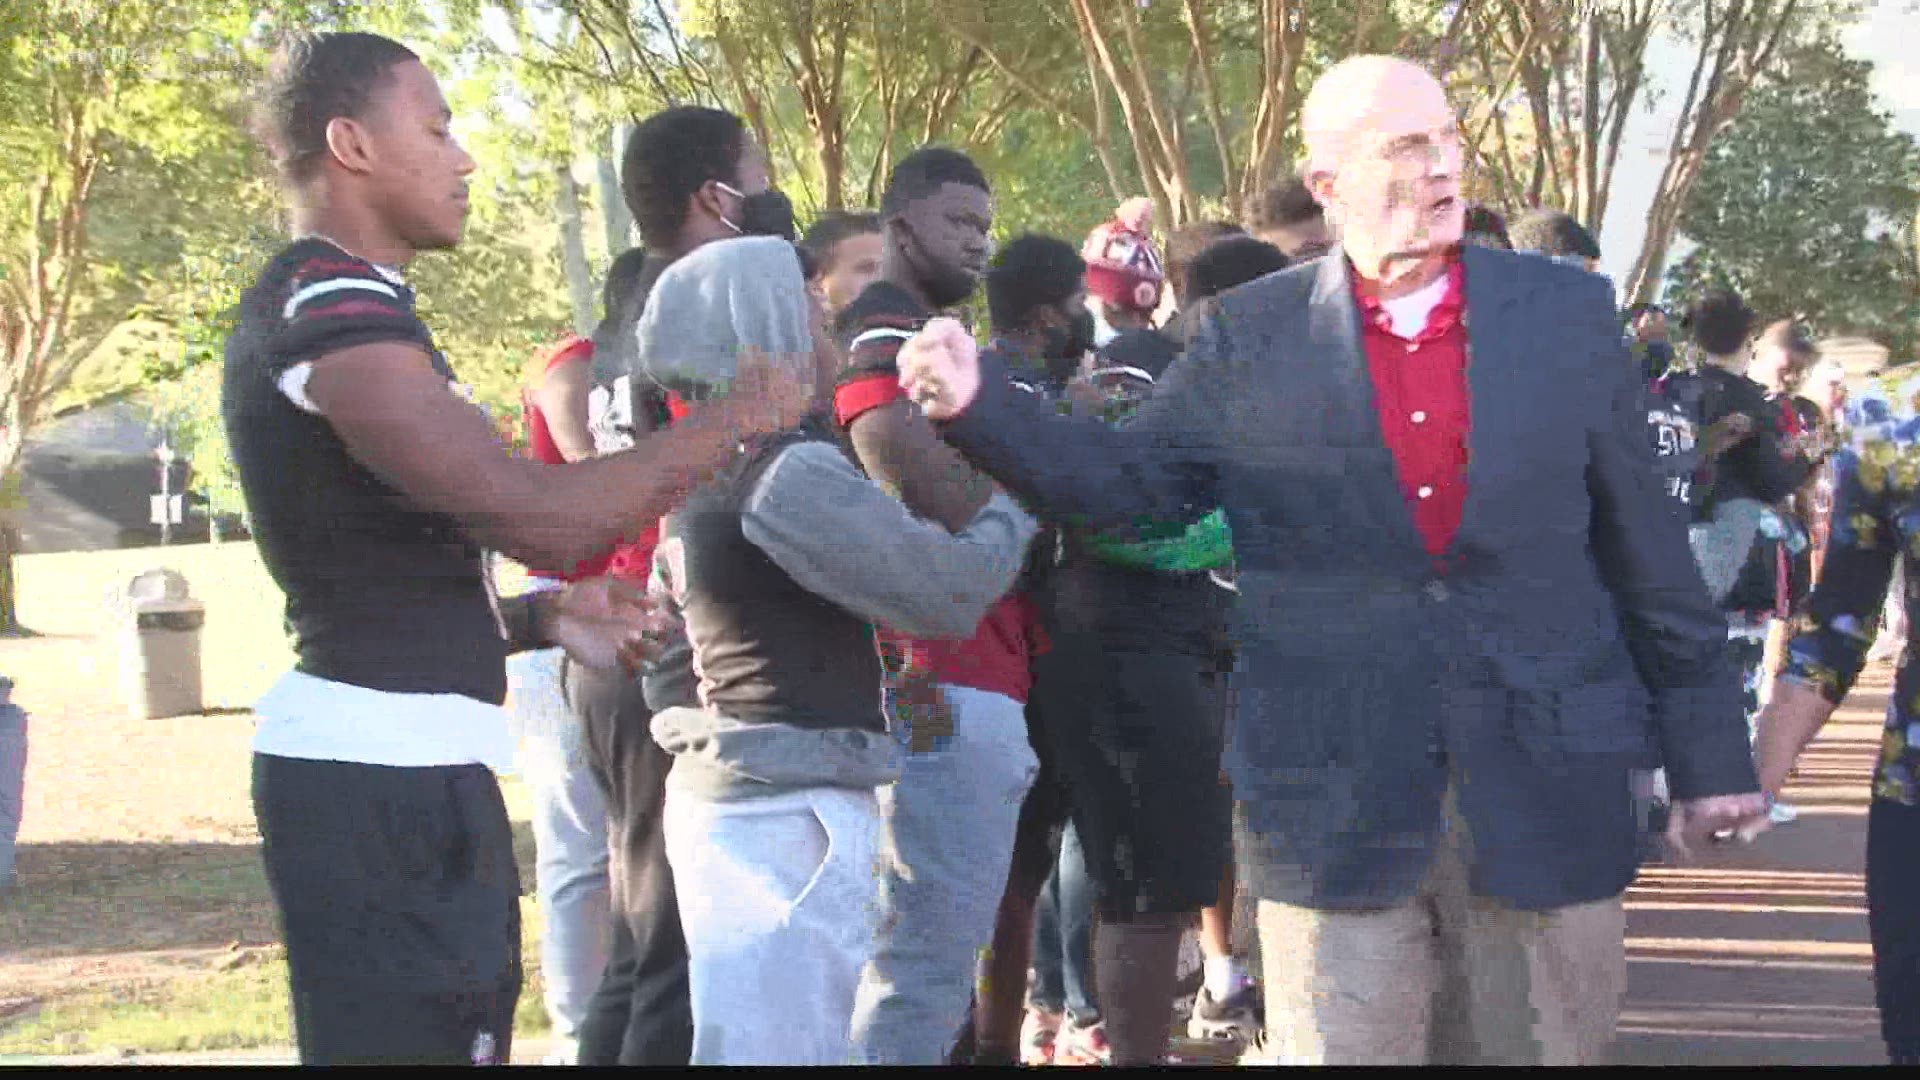 It was a bittersweet day in Milledgeville as the Georgia Military College campus said goodbye to longtime athletic director and football coach Bert Williams.